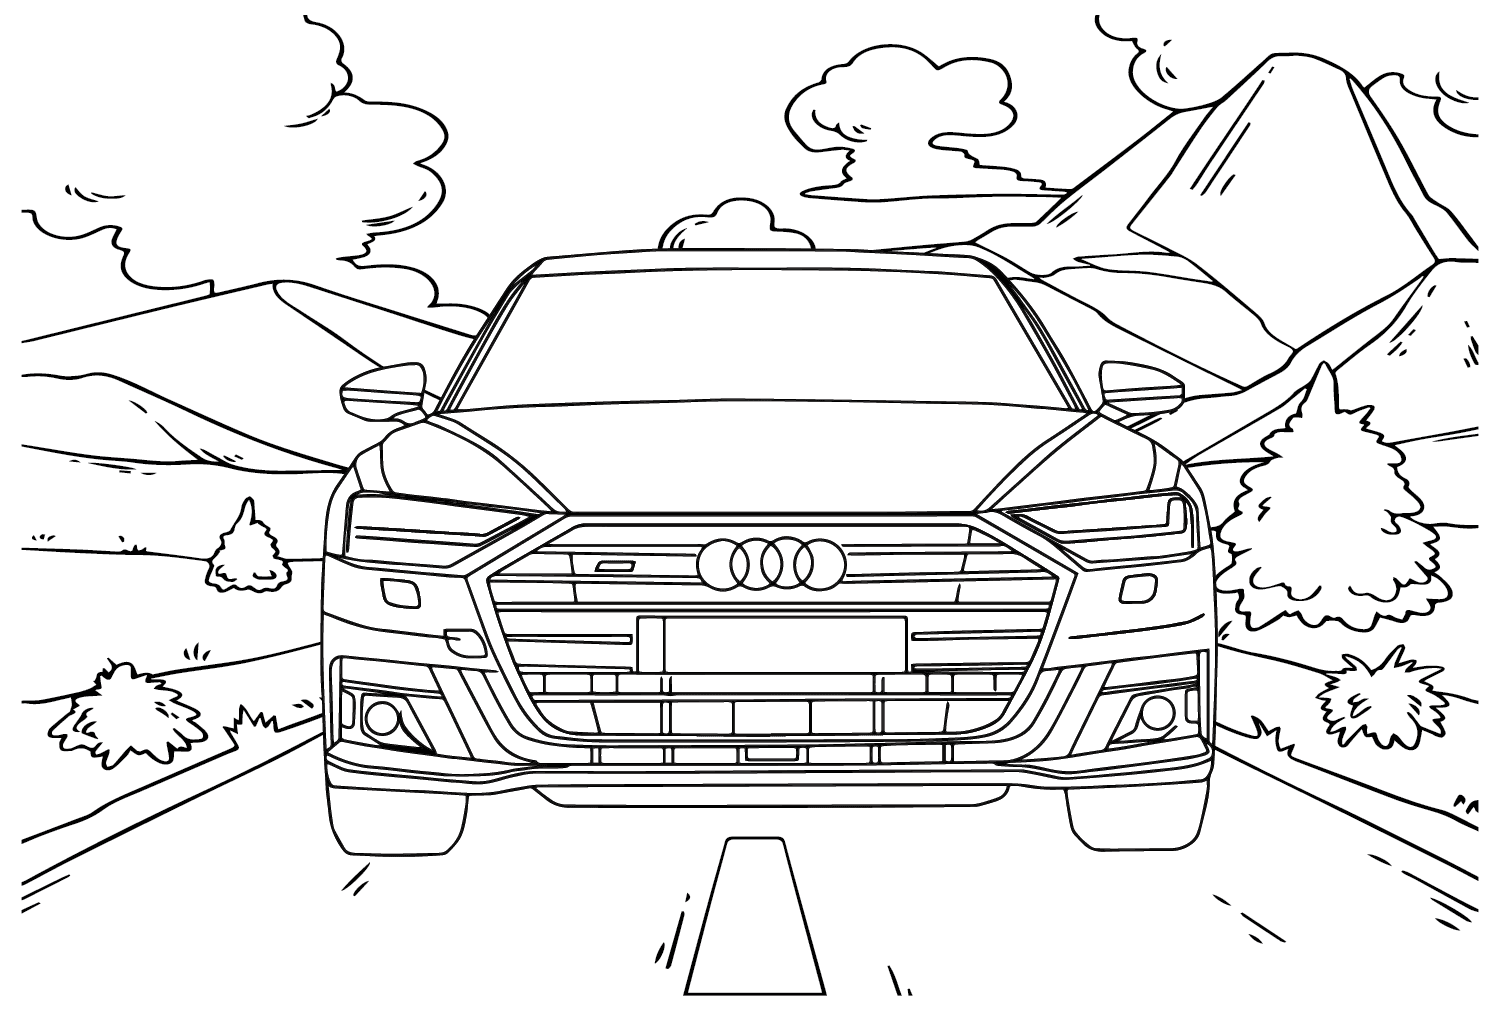 Audi S8 Model 2020 Coloring Page from Audi